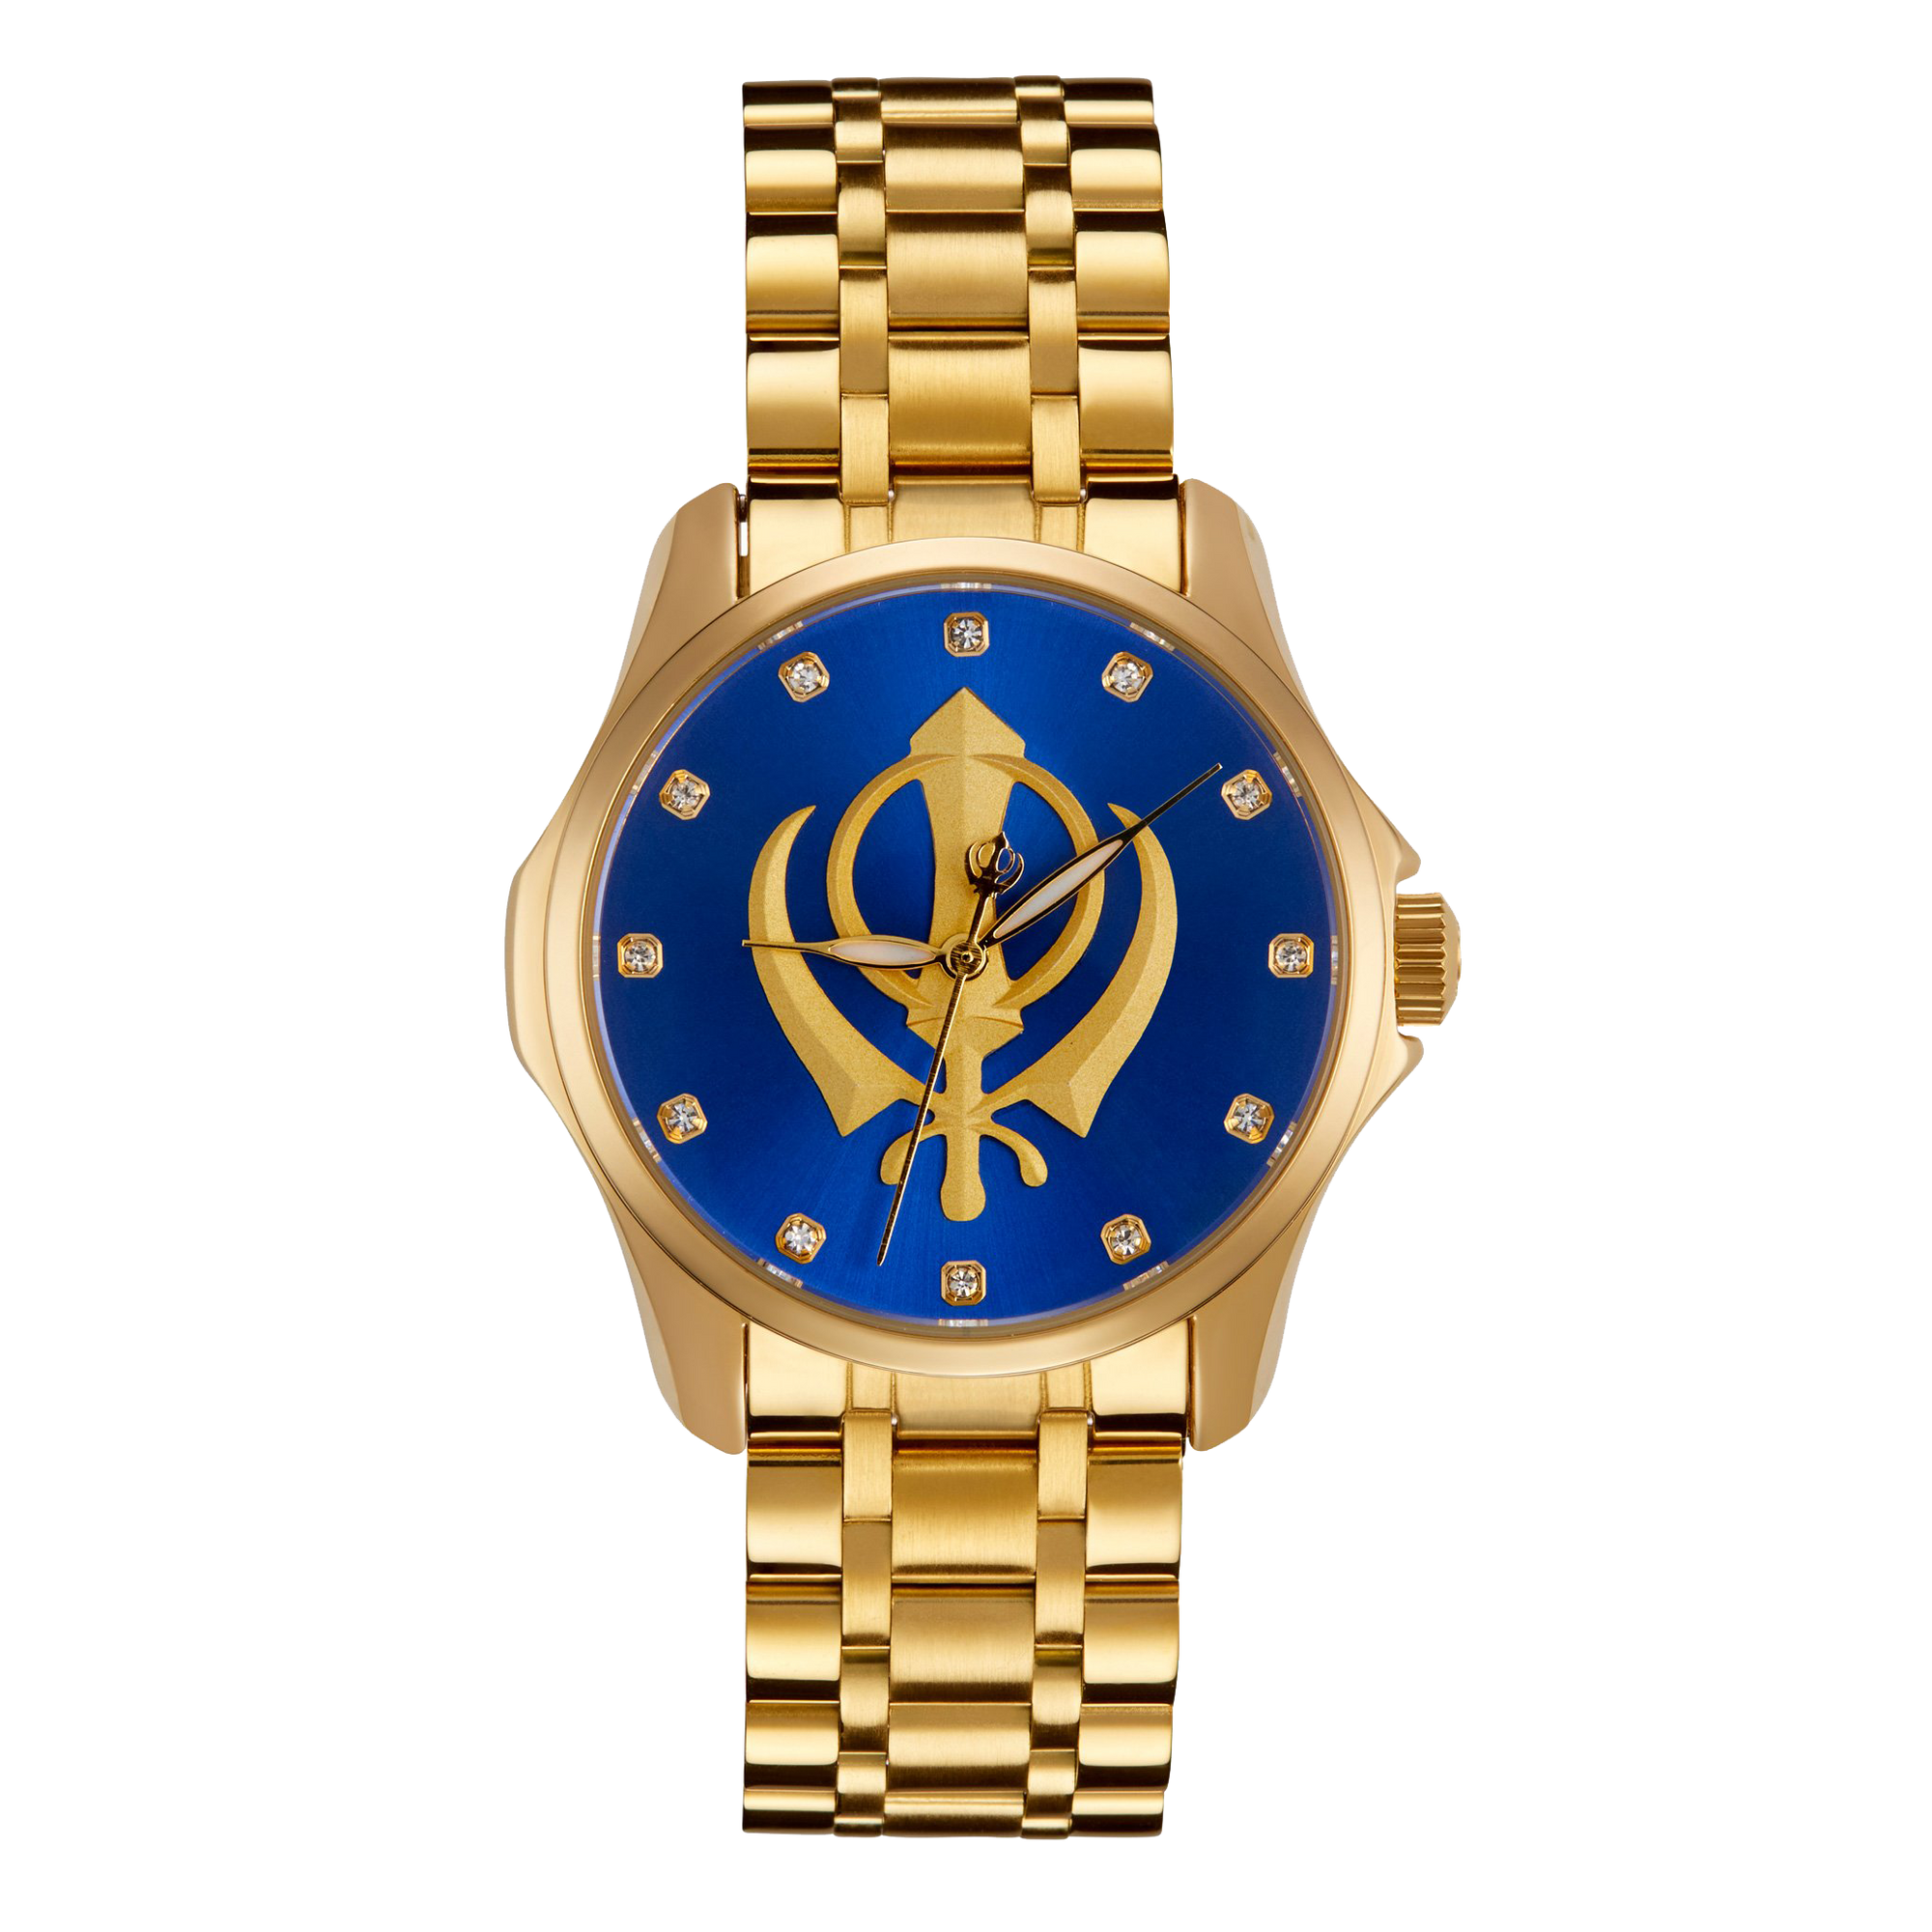 House of Khalsa Heritage Blue Luxury Women's Sikh Watch with Khanda Symbol - Authentic Stainless Steel Design